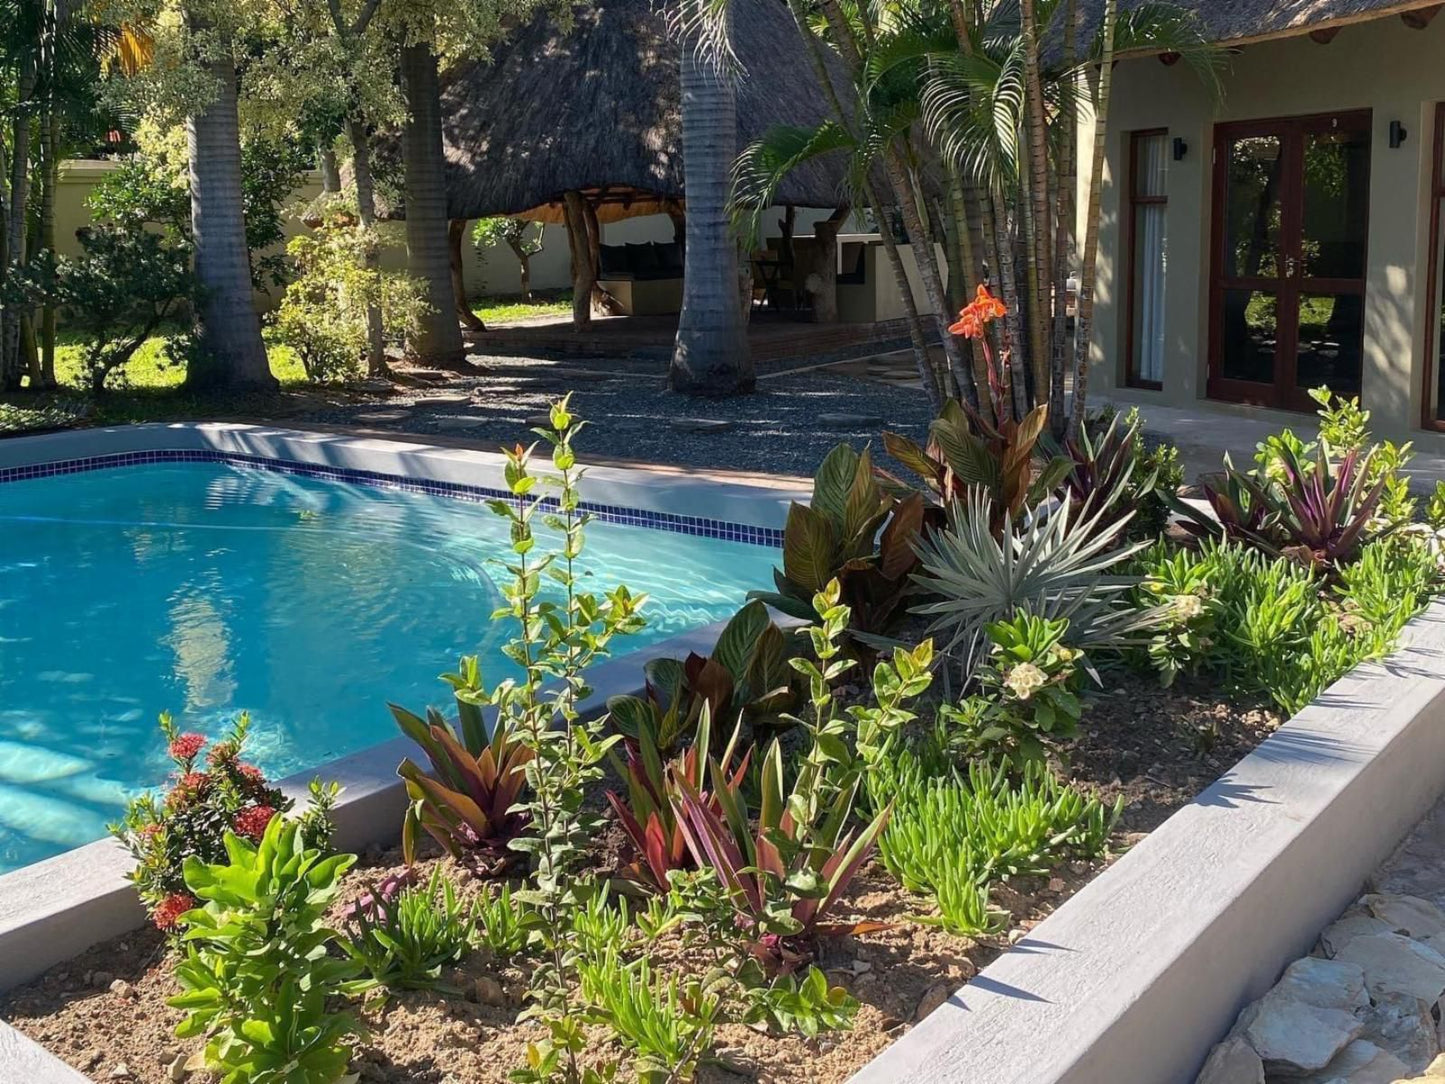 La Lechere Guest House Phalaborwa Limpopo Province South Africa Garden, Nature, Plant, Swimming Pool